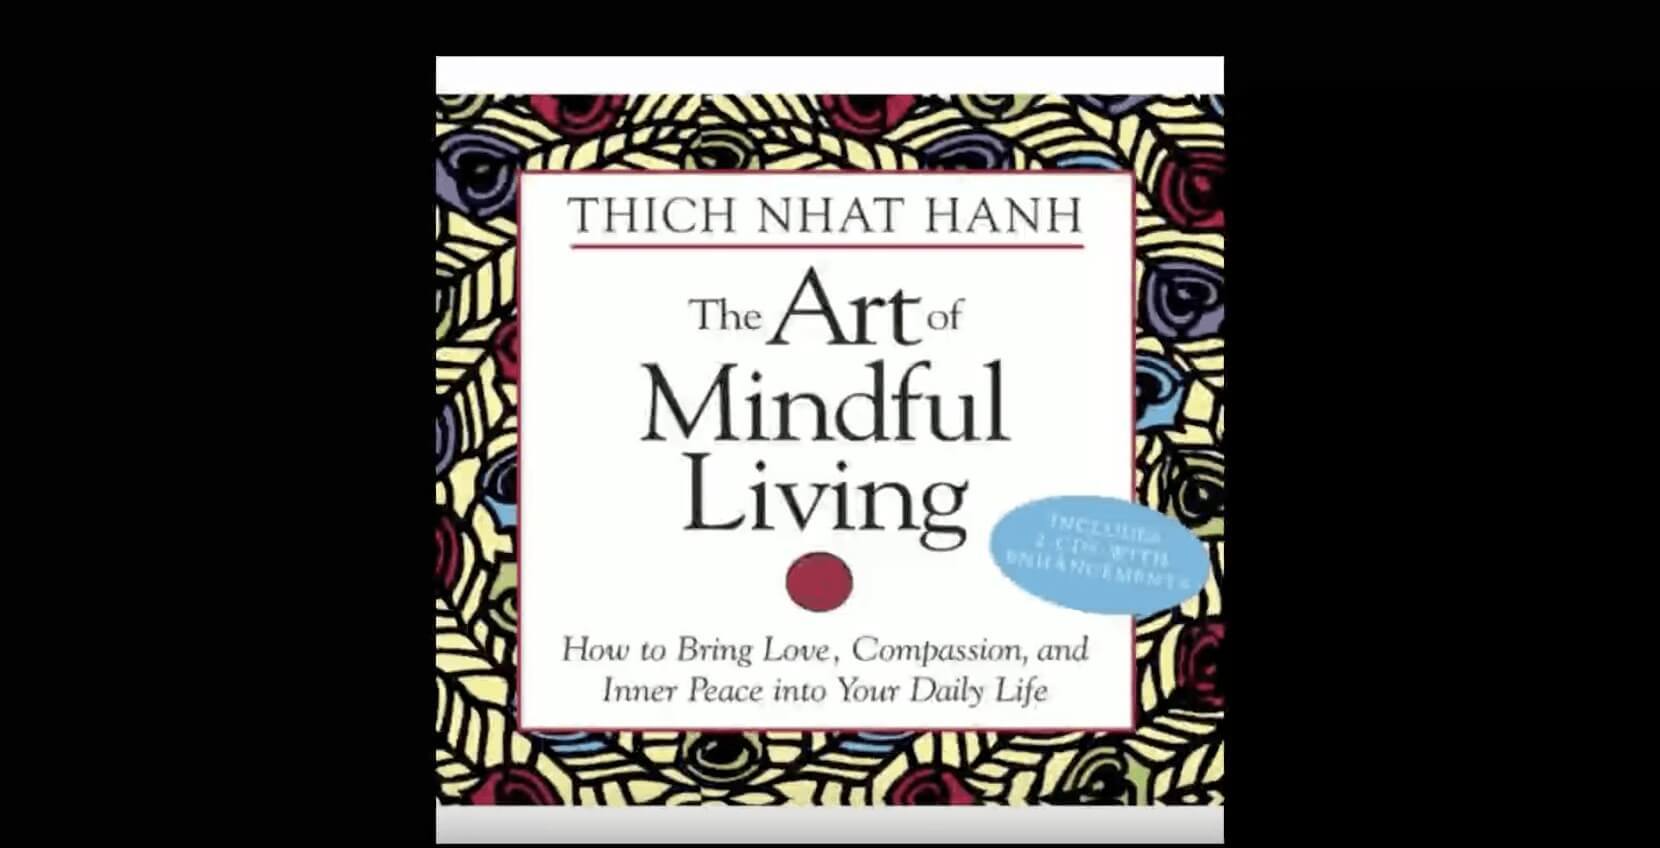 Thich Nhat Hanh The Art of Mindful Living